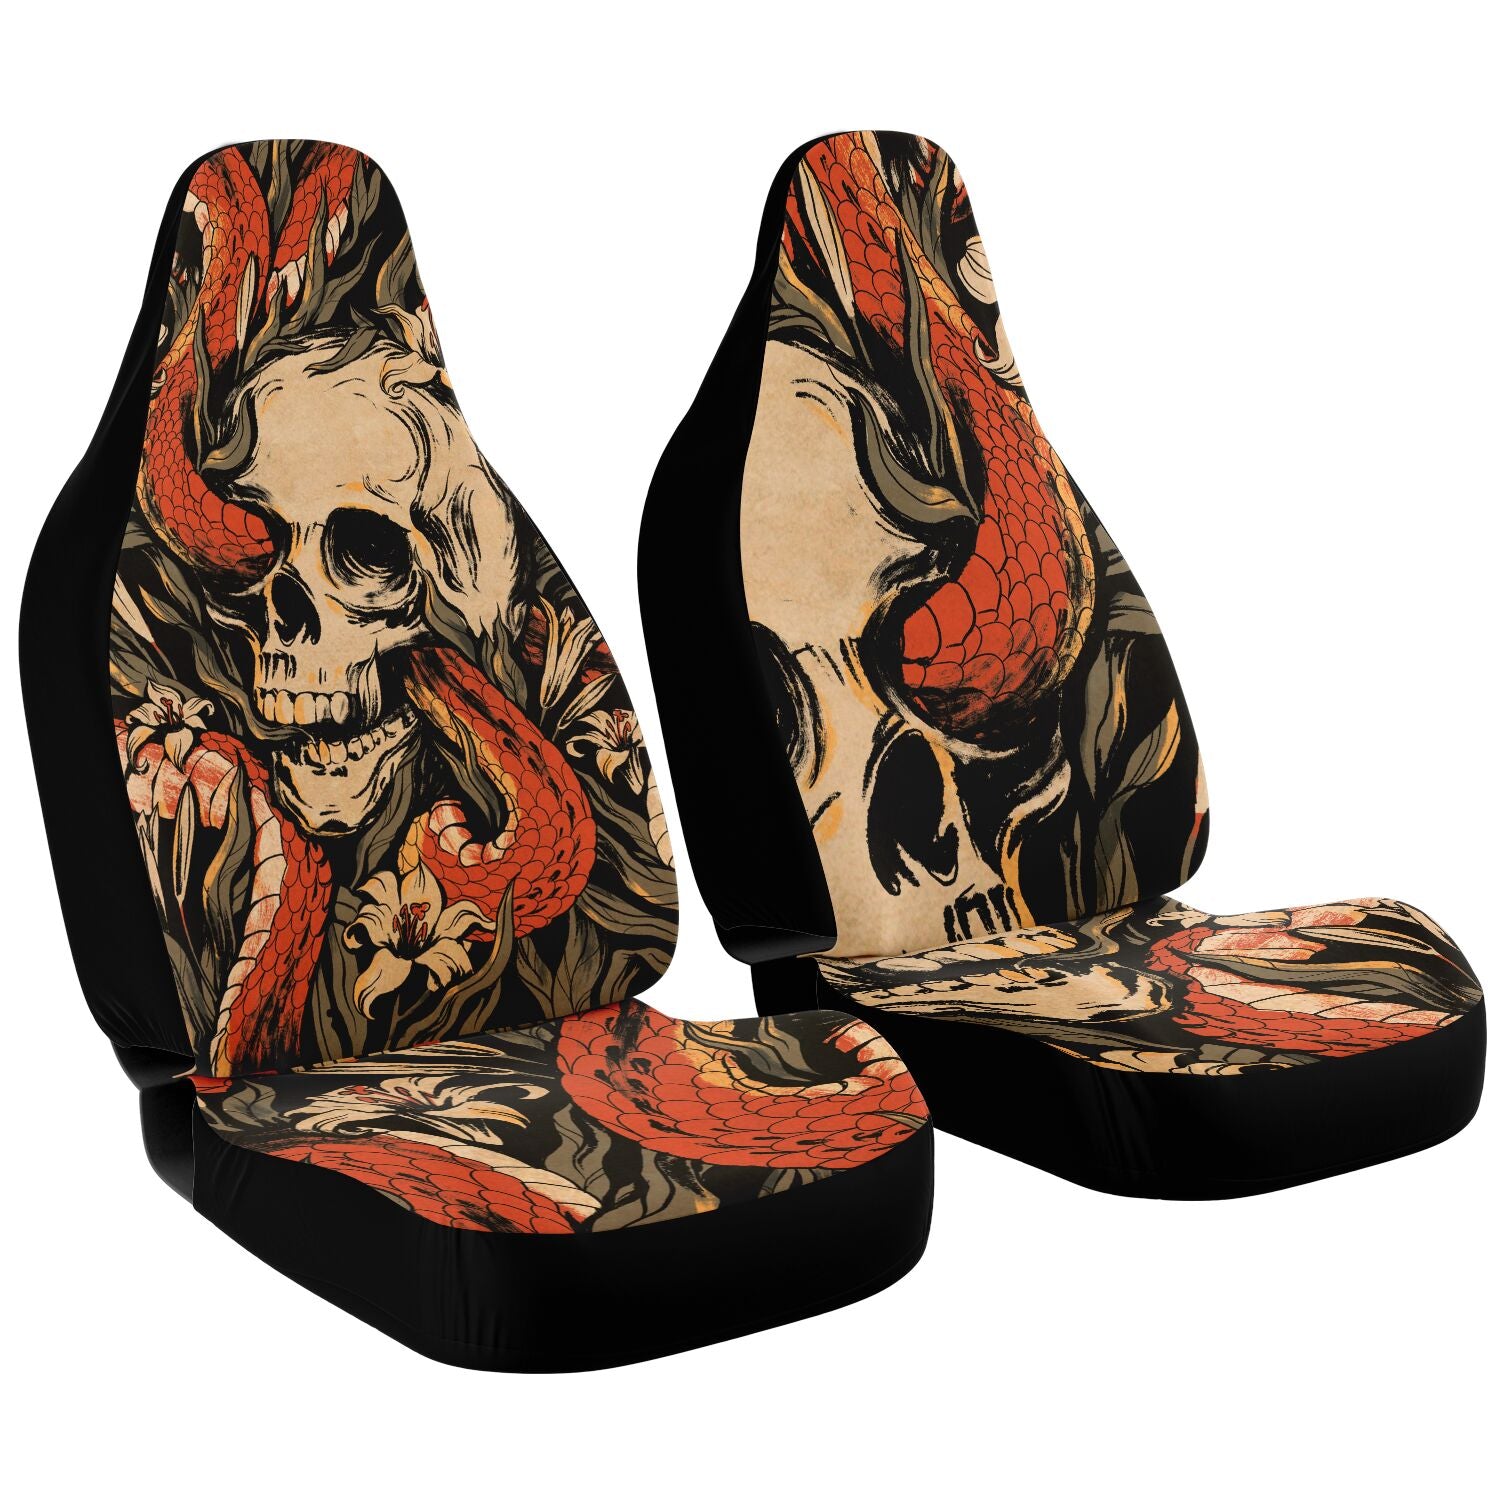 Snake Wrapping Skull Car Seat Cover Set